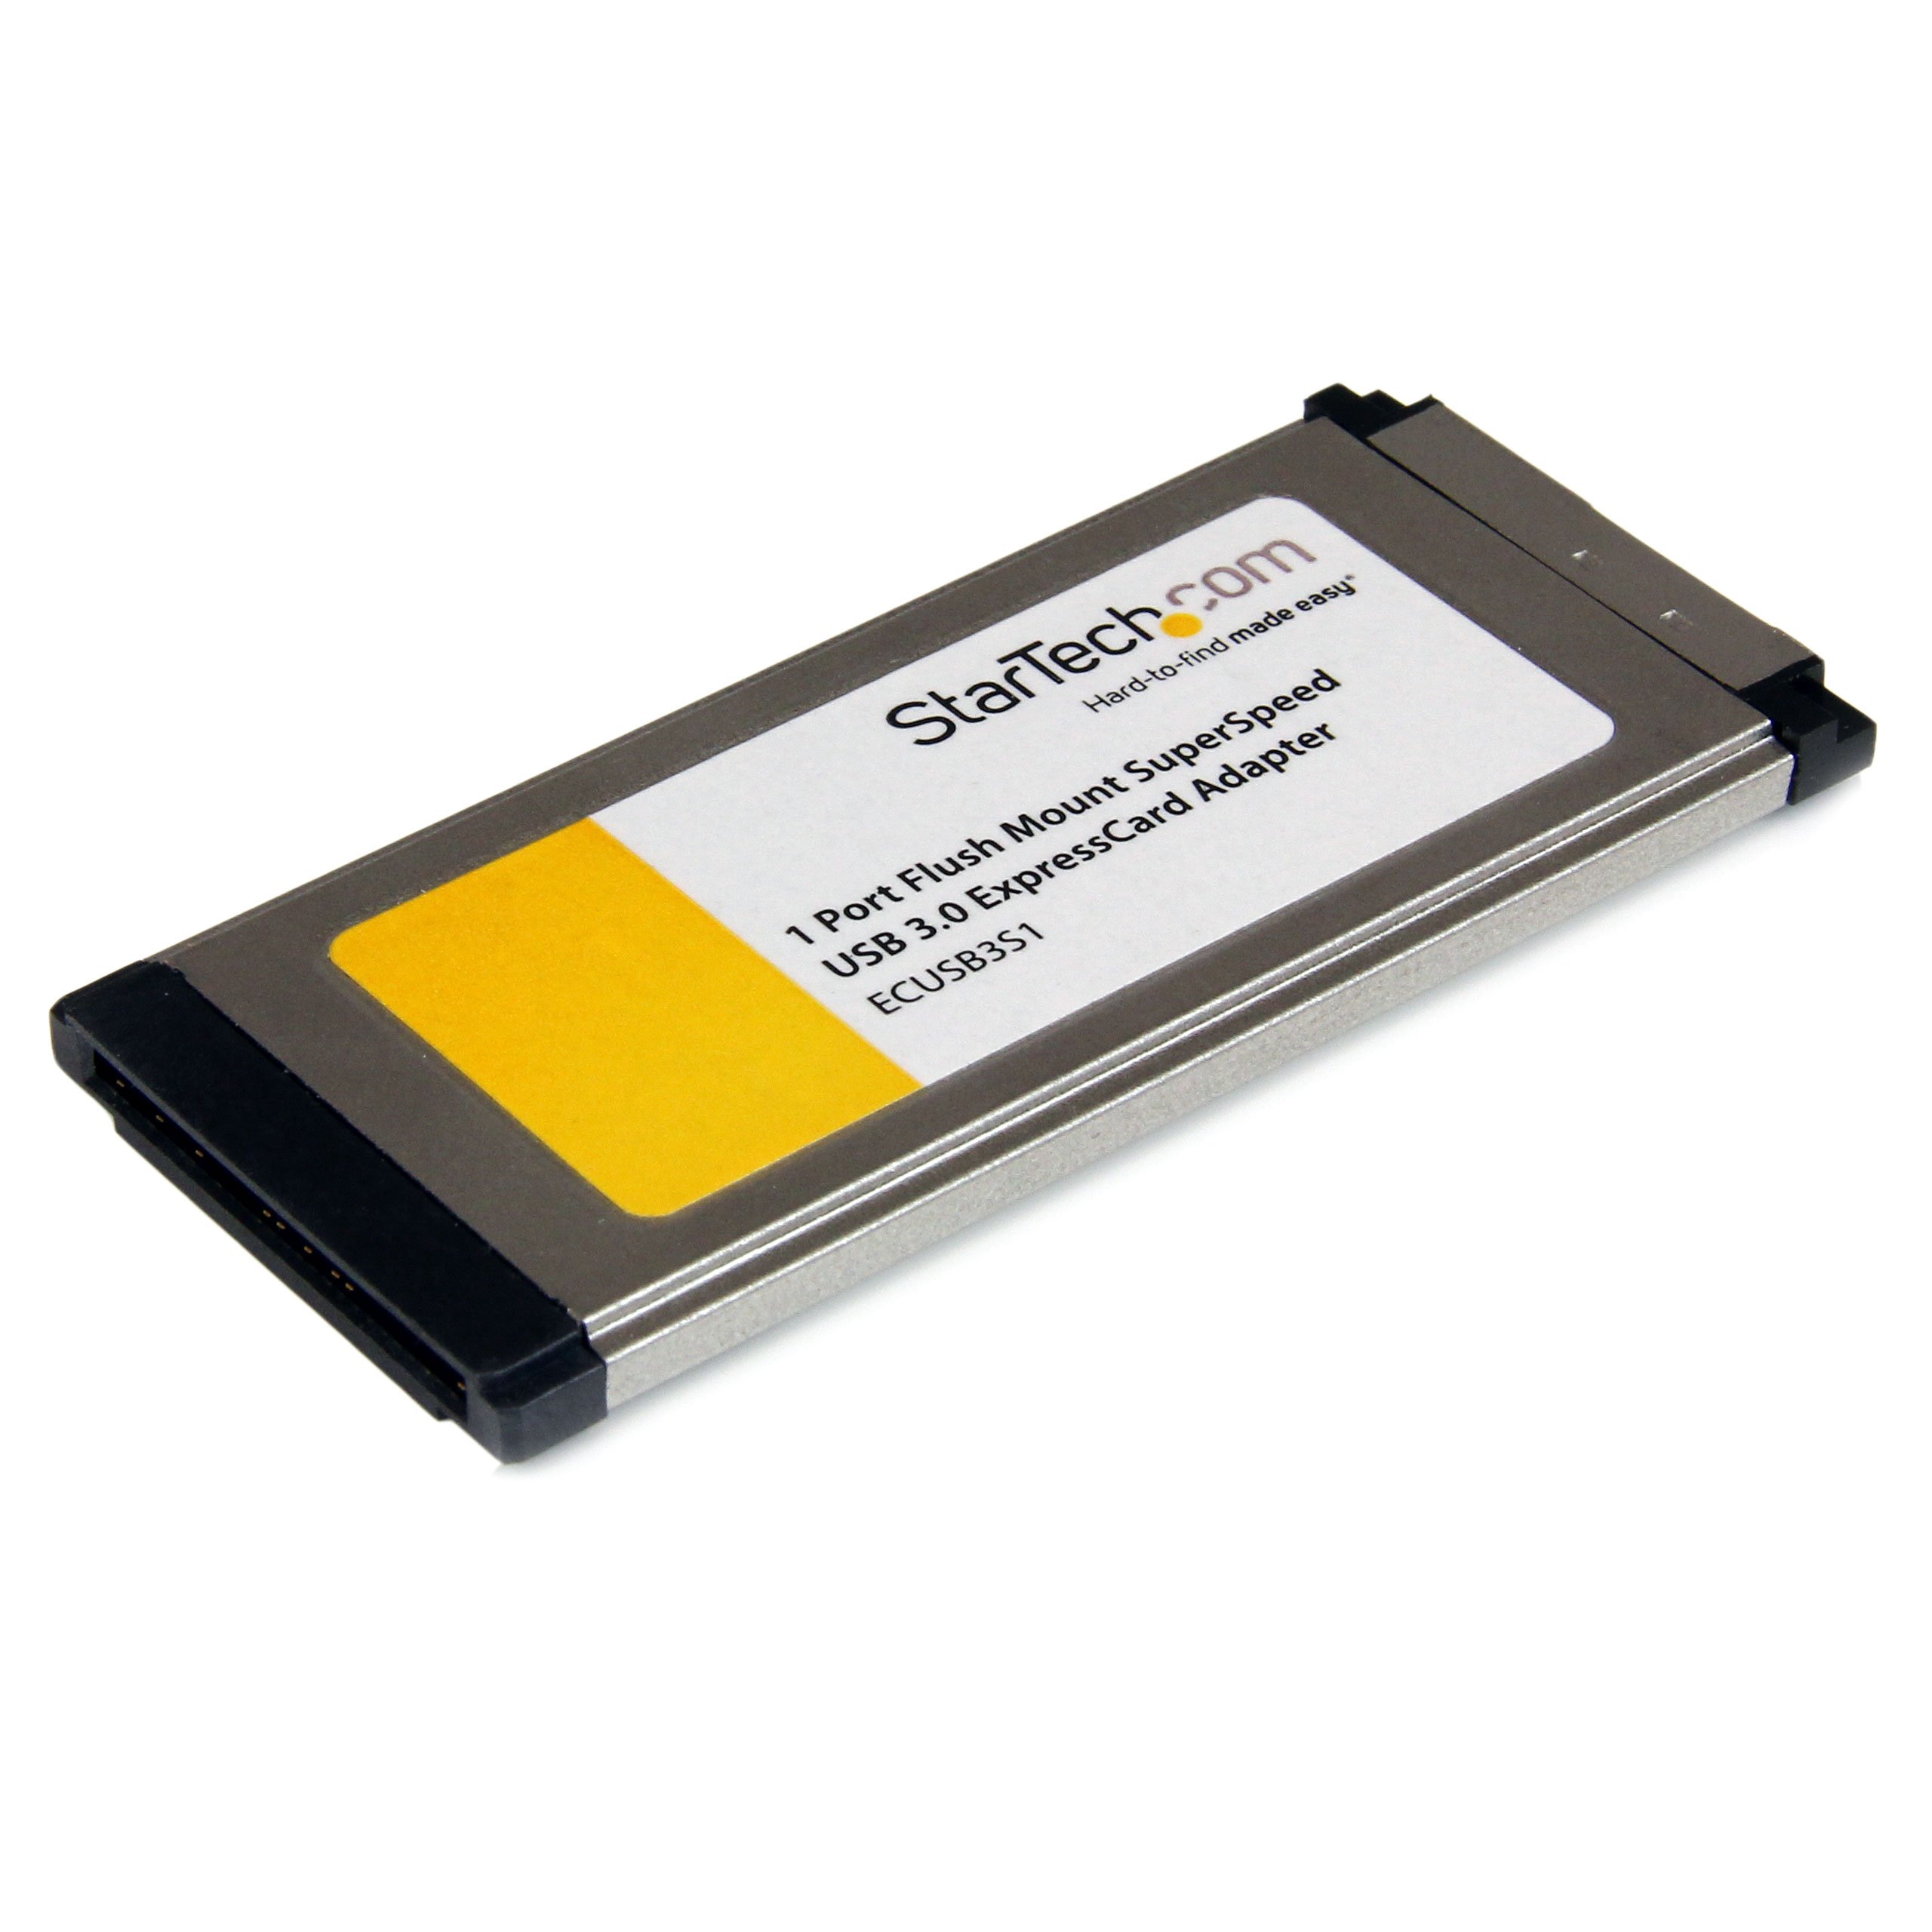 Expresscard Usb 3 0 Startech Comp Cards And Adapters Ecusb3s11 65030849890